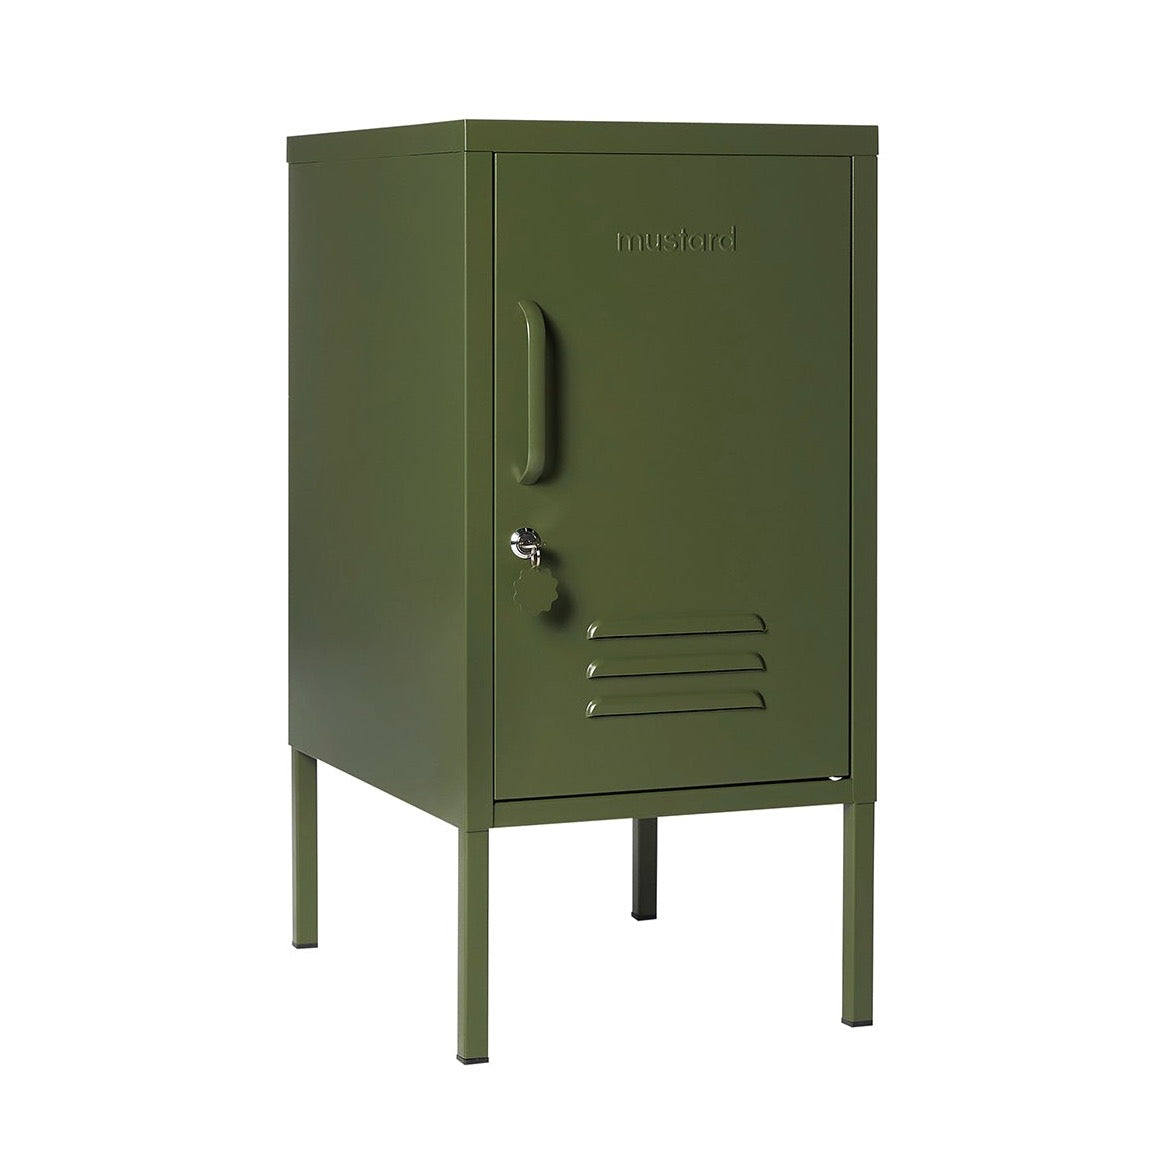 Shorty Locker in Olive By Mustard Made